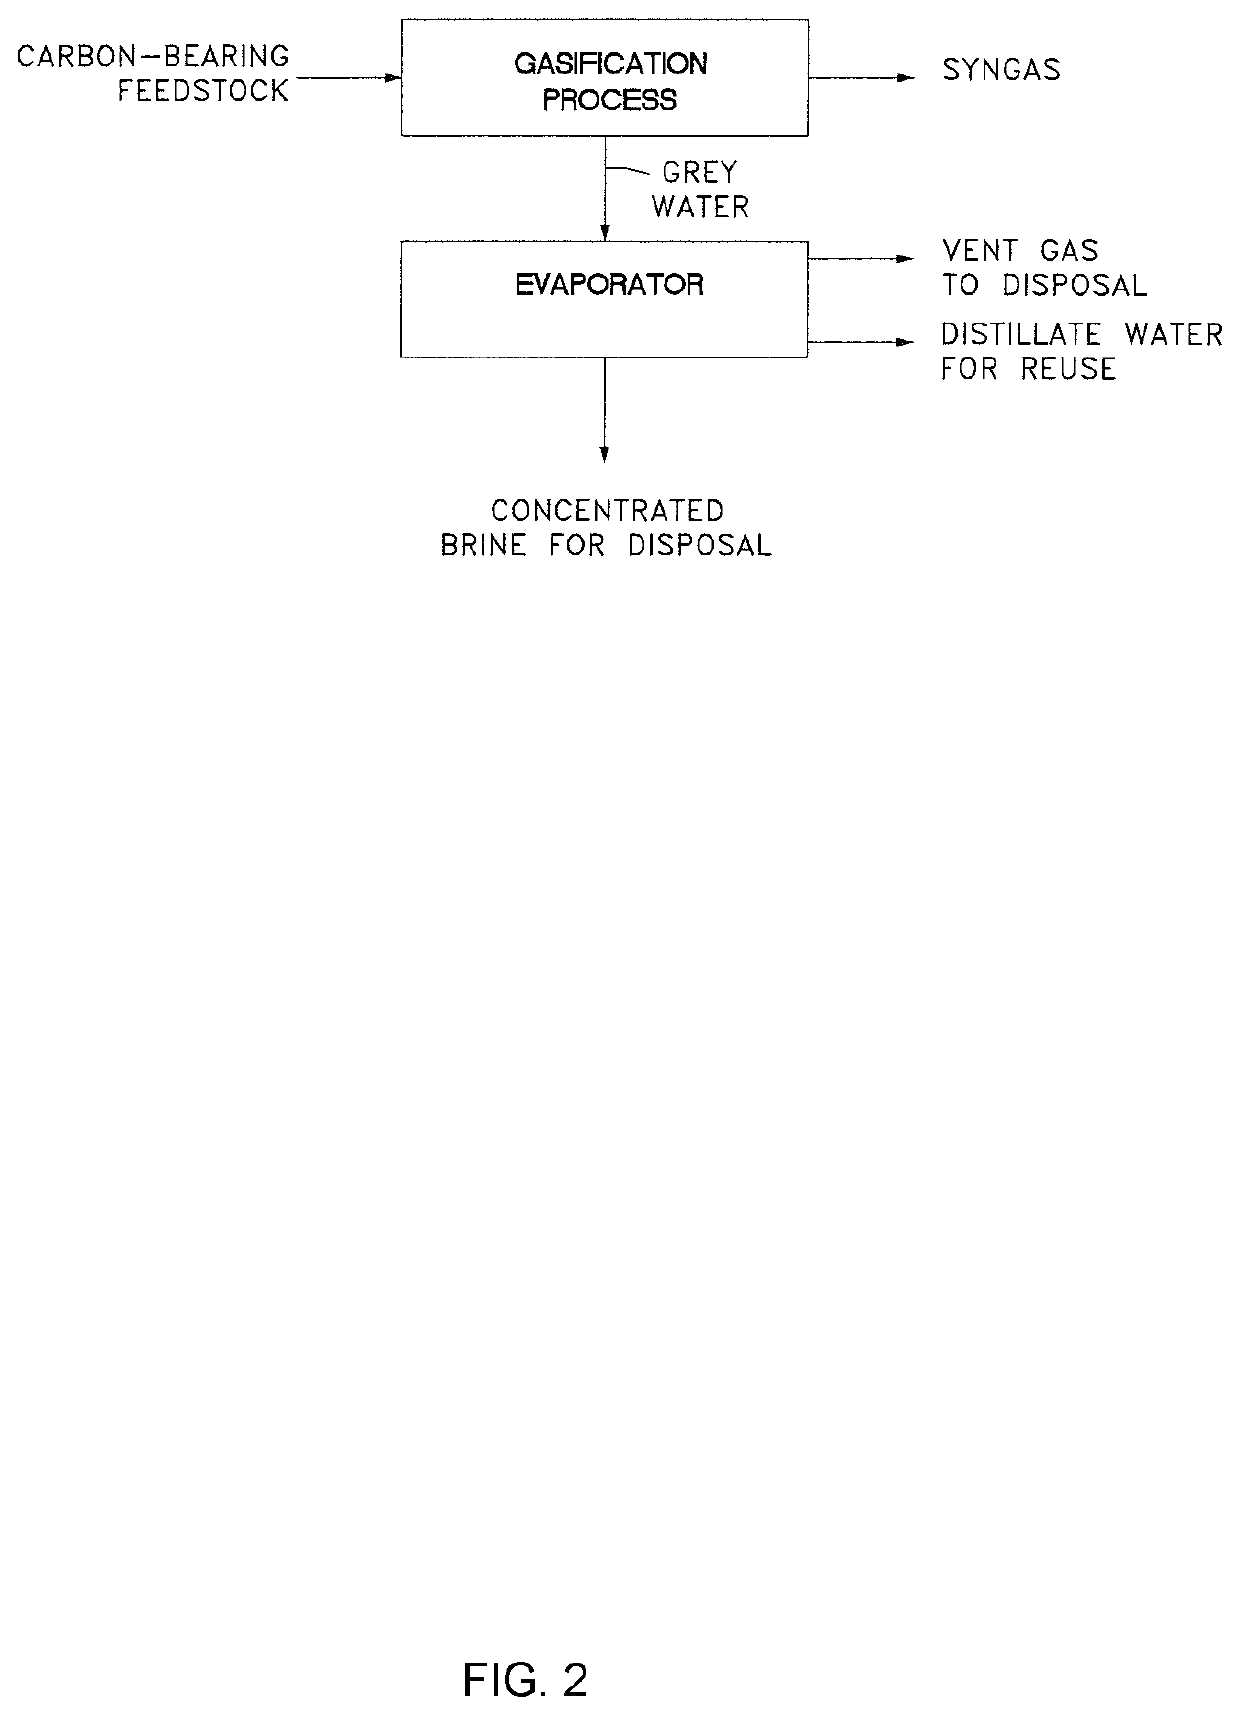 Method and Apparatus for Gasification Wastewater Treatment